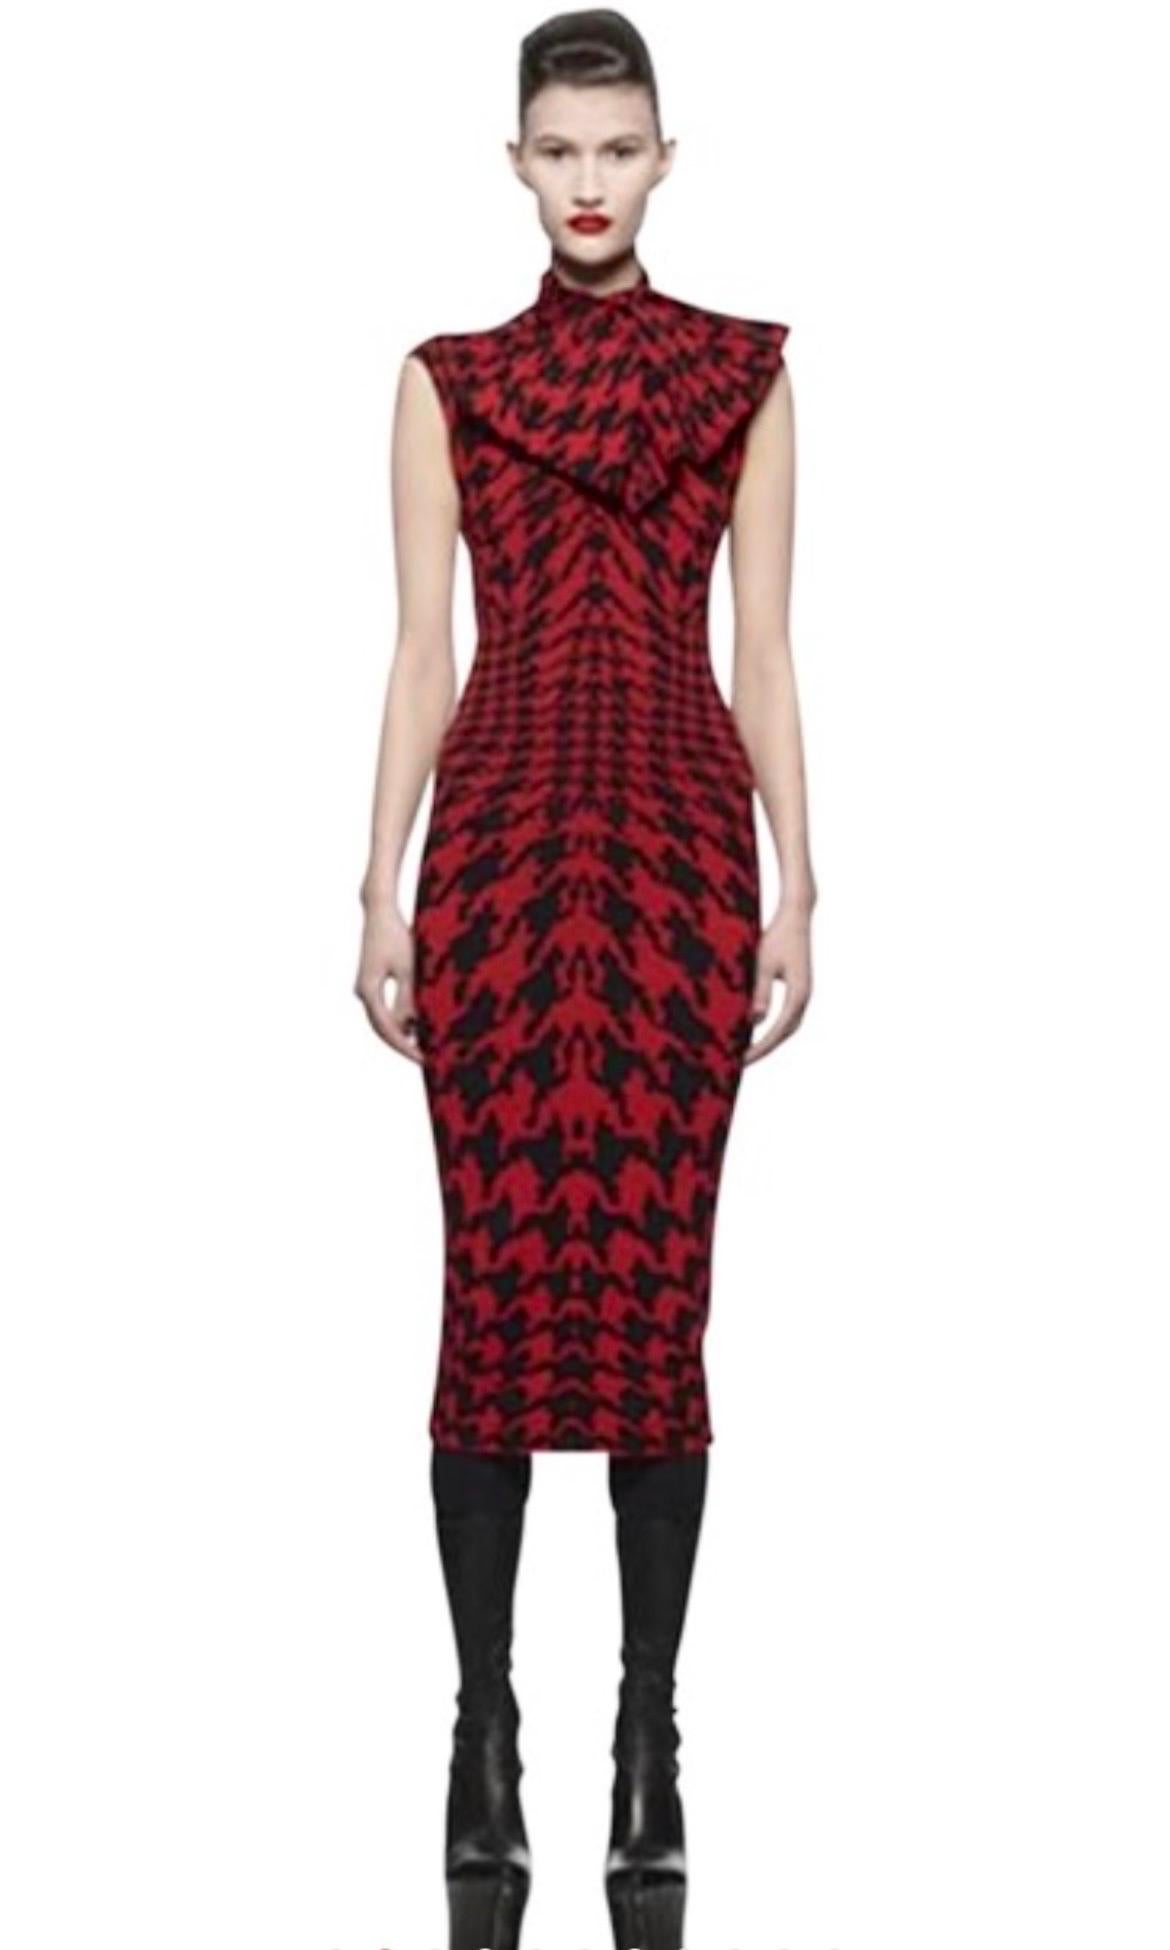 ALEXANDER MCQUEEN
Circa 2009
Uber rare iconic piece!
Red and black houndstooth print knit dress.
Finished with scarf
100% wool
IT Size S
Bust 16